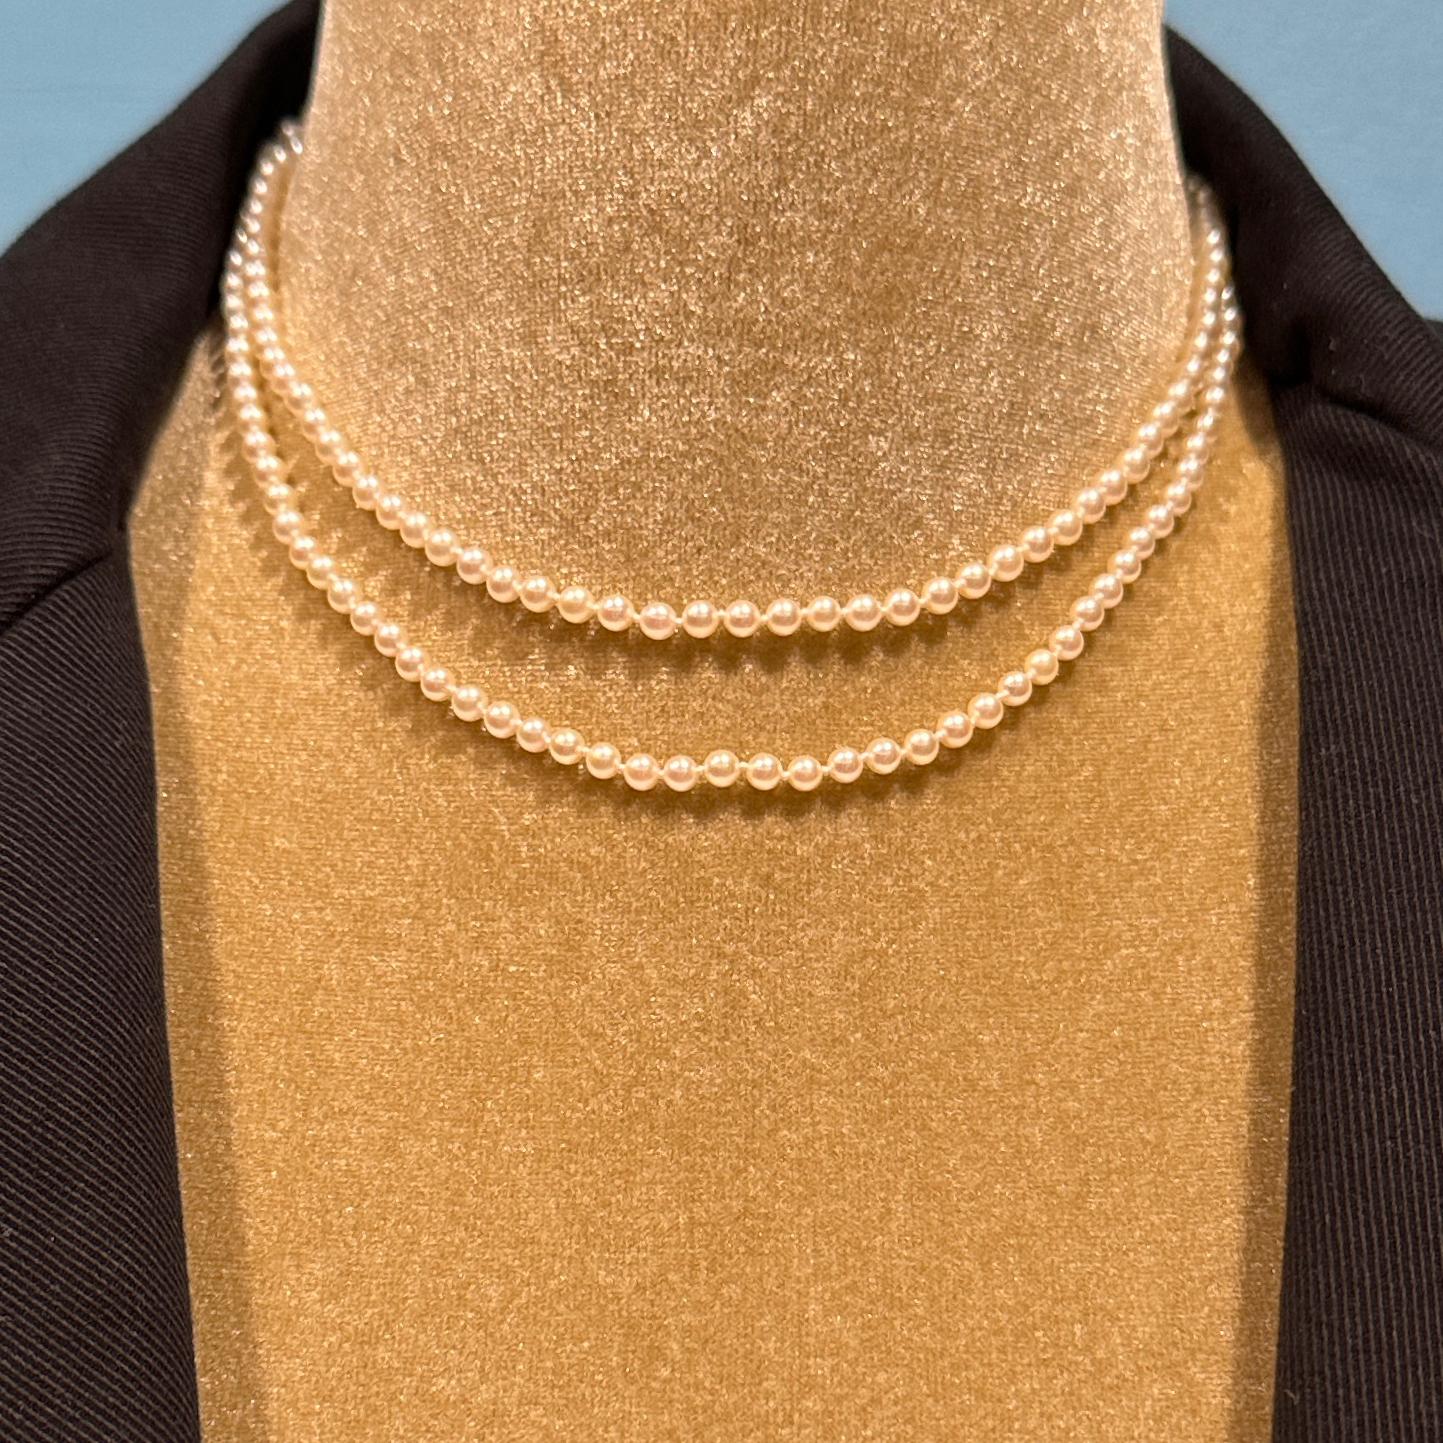 Women's or Men's Opera Length Strand of Japanese Akoya Cultured Pearls with 14k Gold Clasp